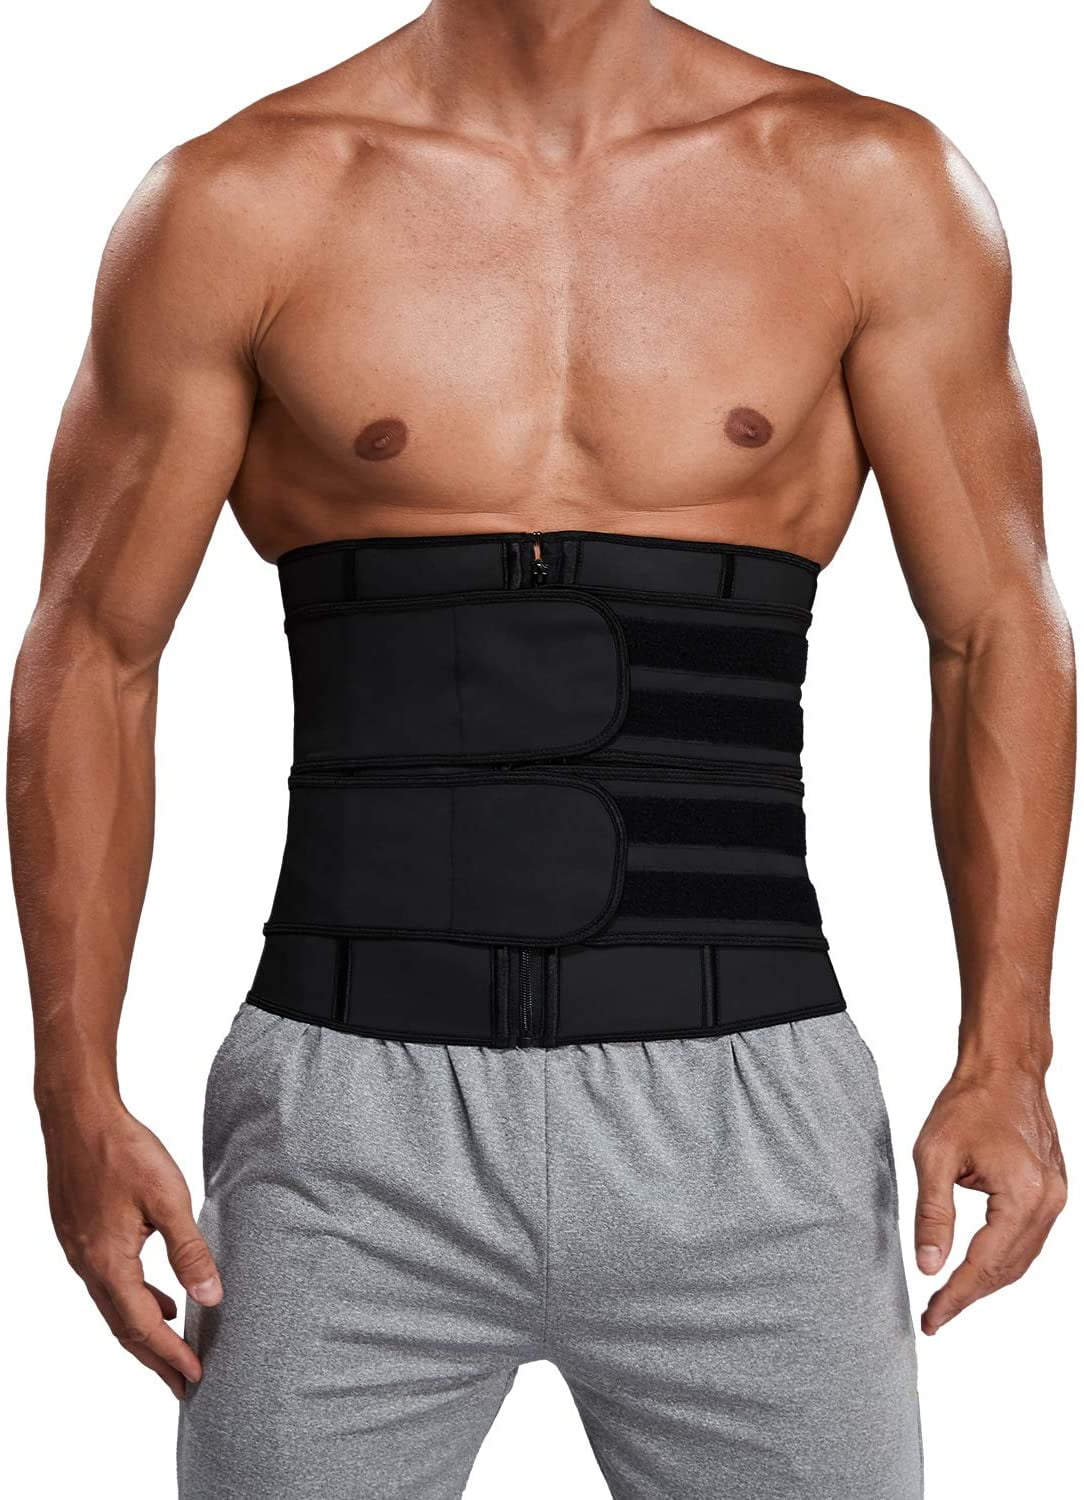 Made with Neoprene Excellent for Running or Fitness Workout Helps Sculpt Your abs and Weight Loss FitBelly Gear Sauna Vest for Men Size Medium Body Shaper with with Zipper